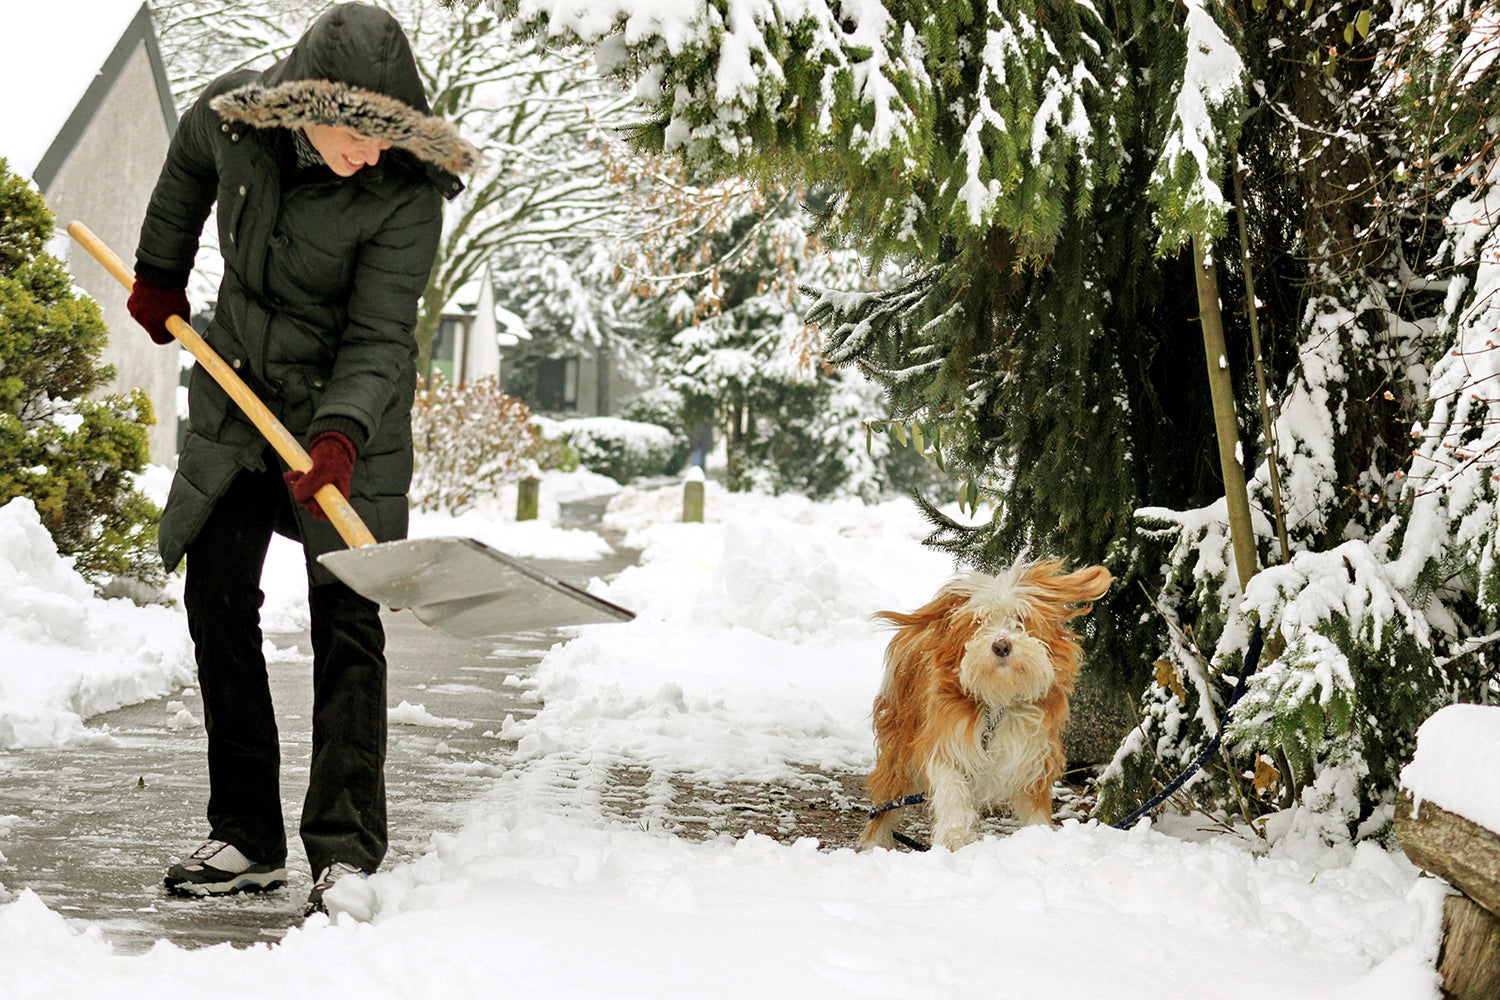 7 Winter Health Tips for Busy Moms